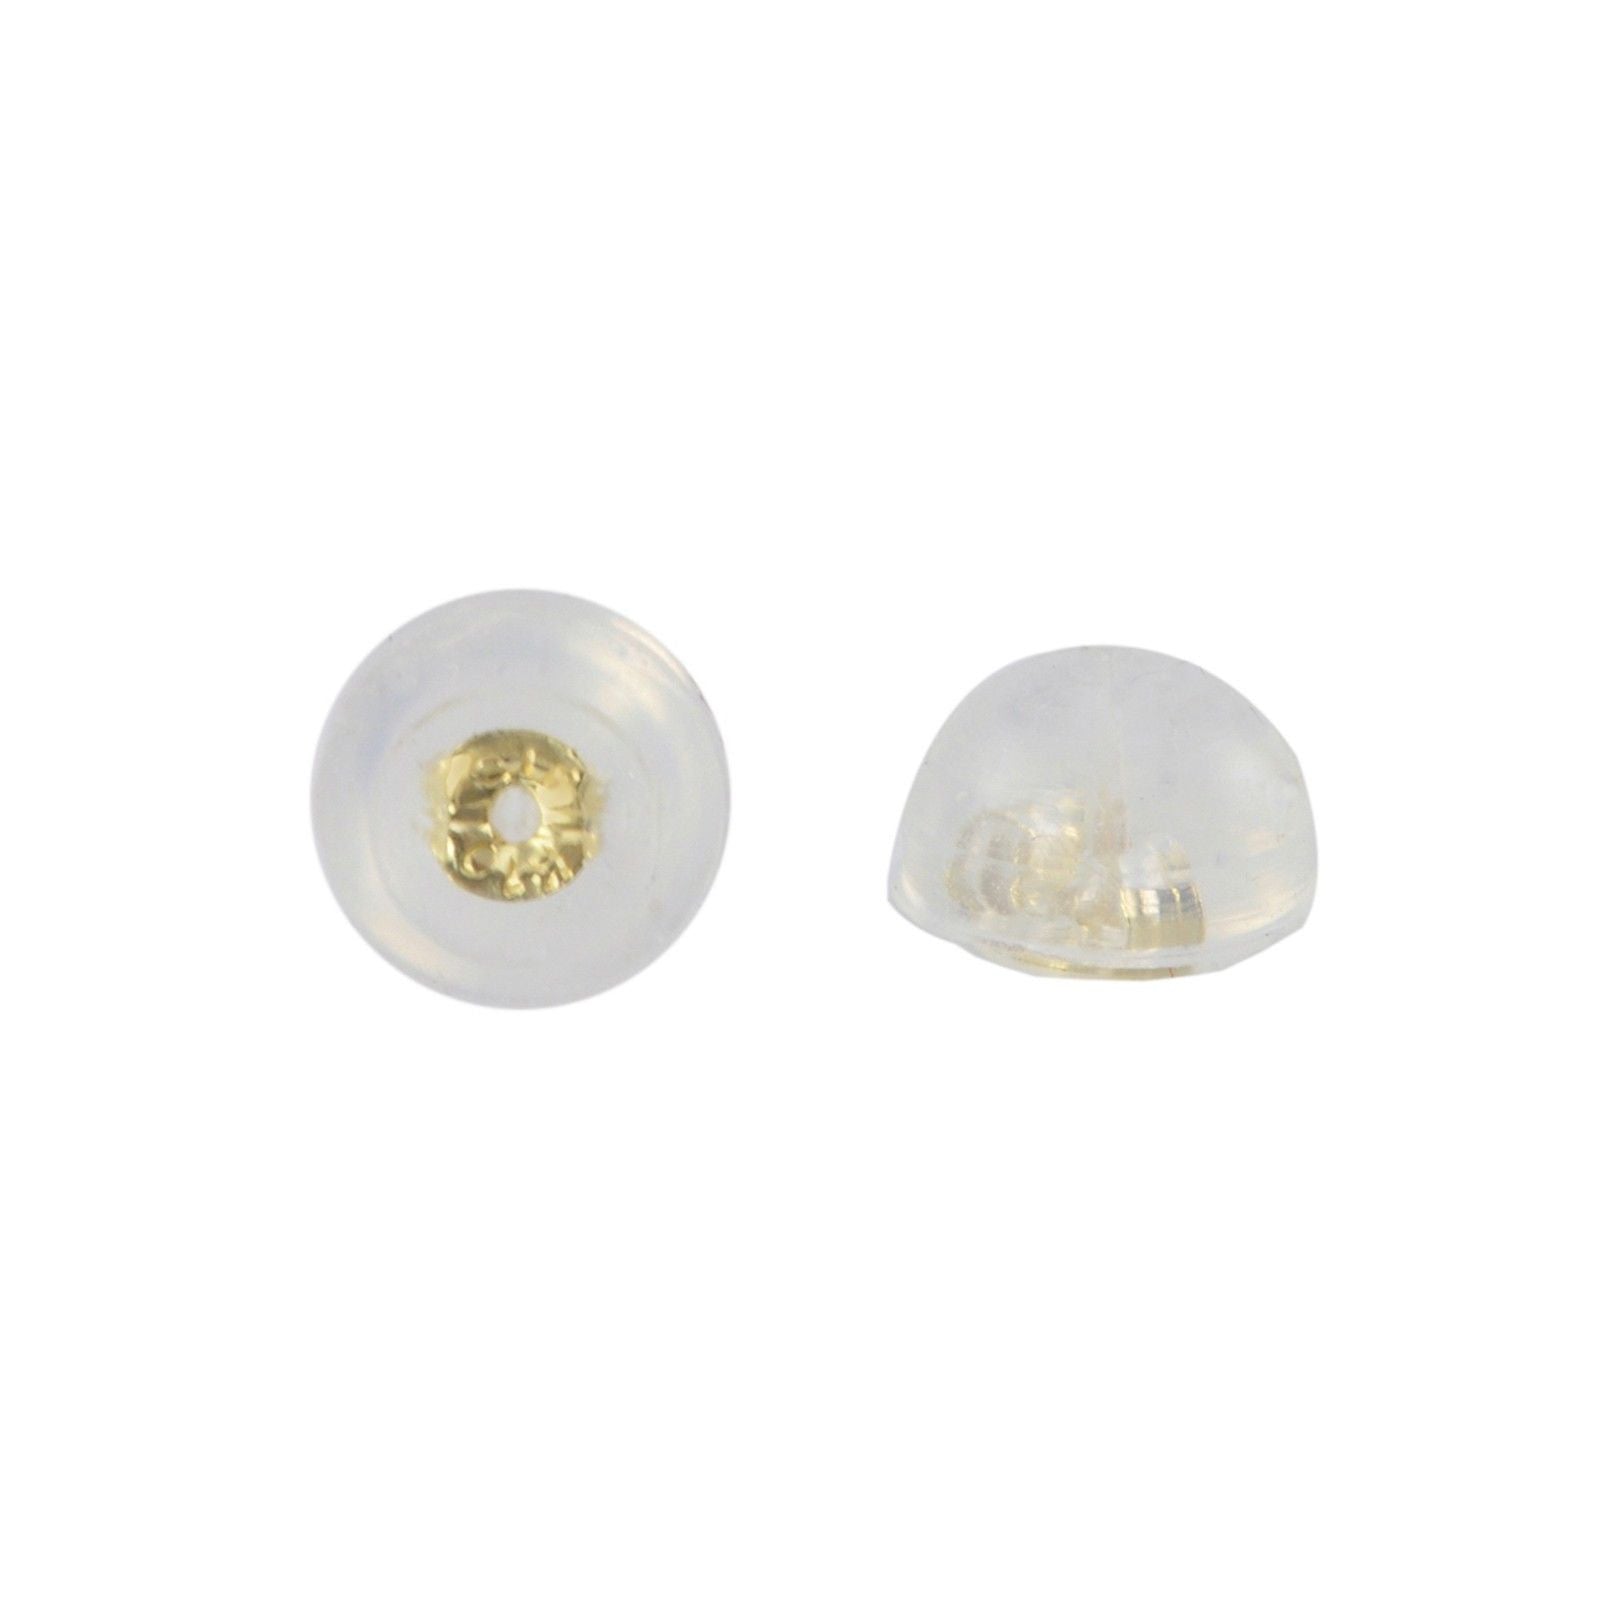 Silicone Earring Backs Clutches 10k White Gold Inserts Screw back or F